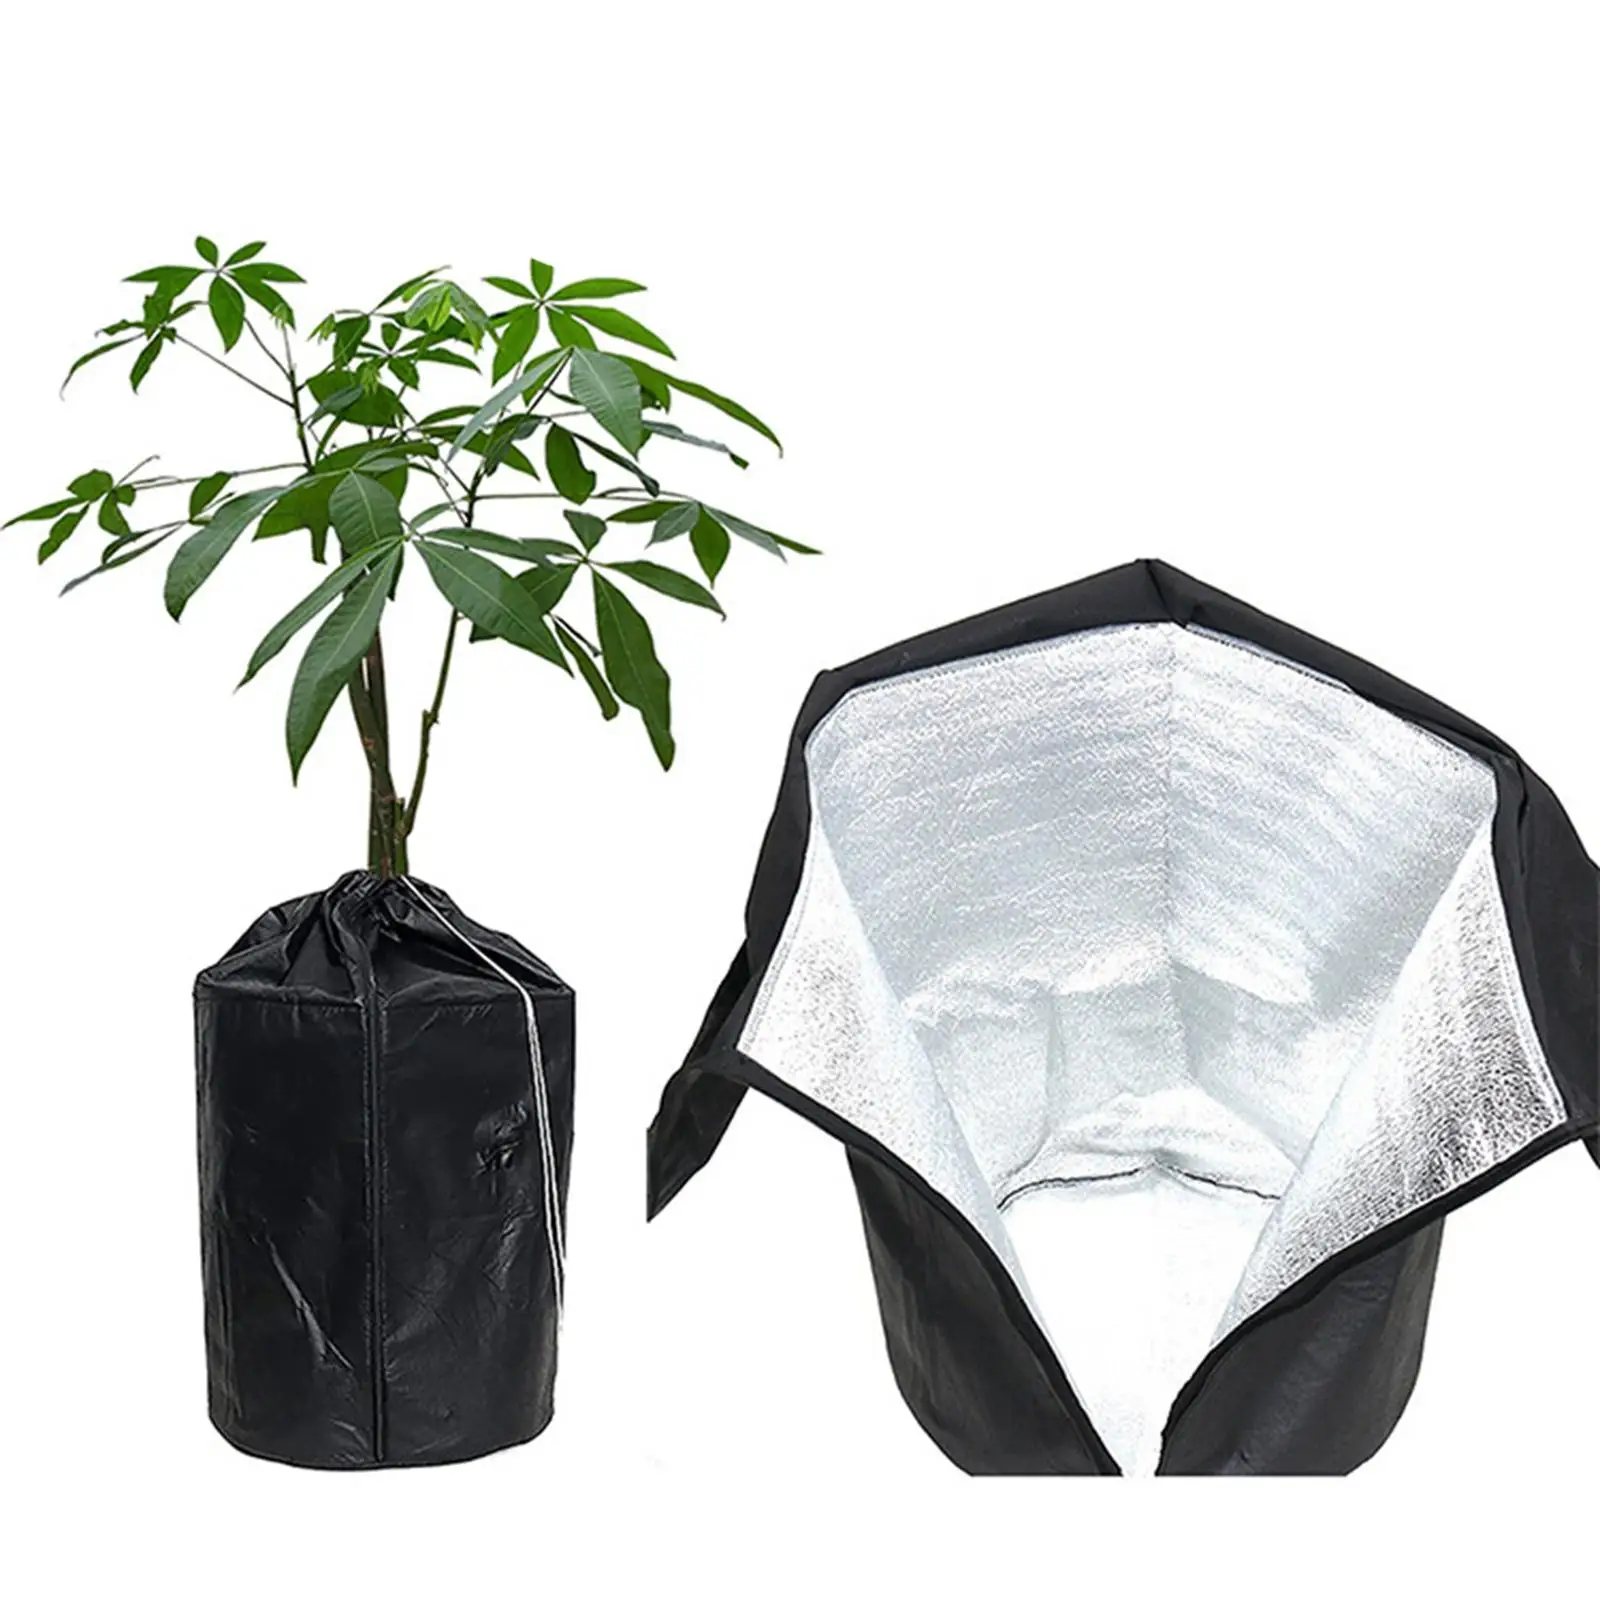 Plant Covers Garden Protector Frost Freeze Protection for Garden